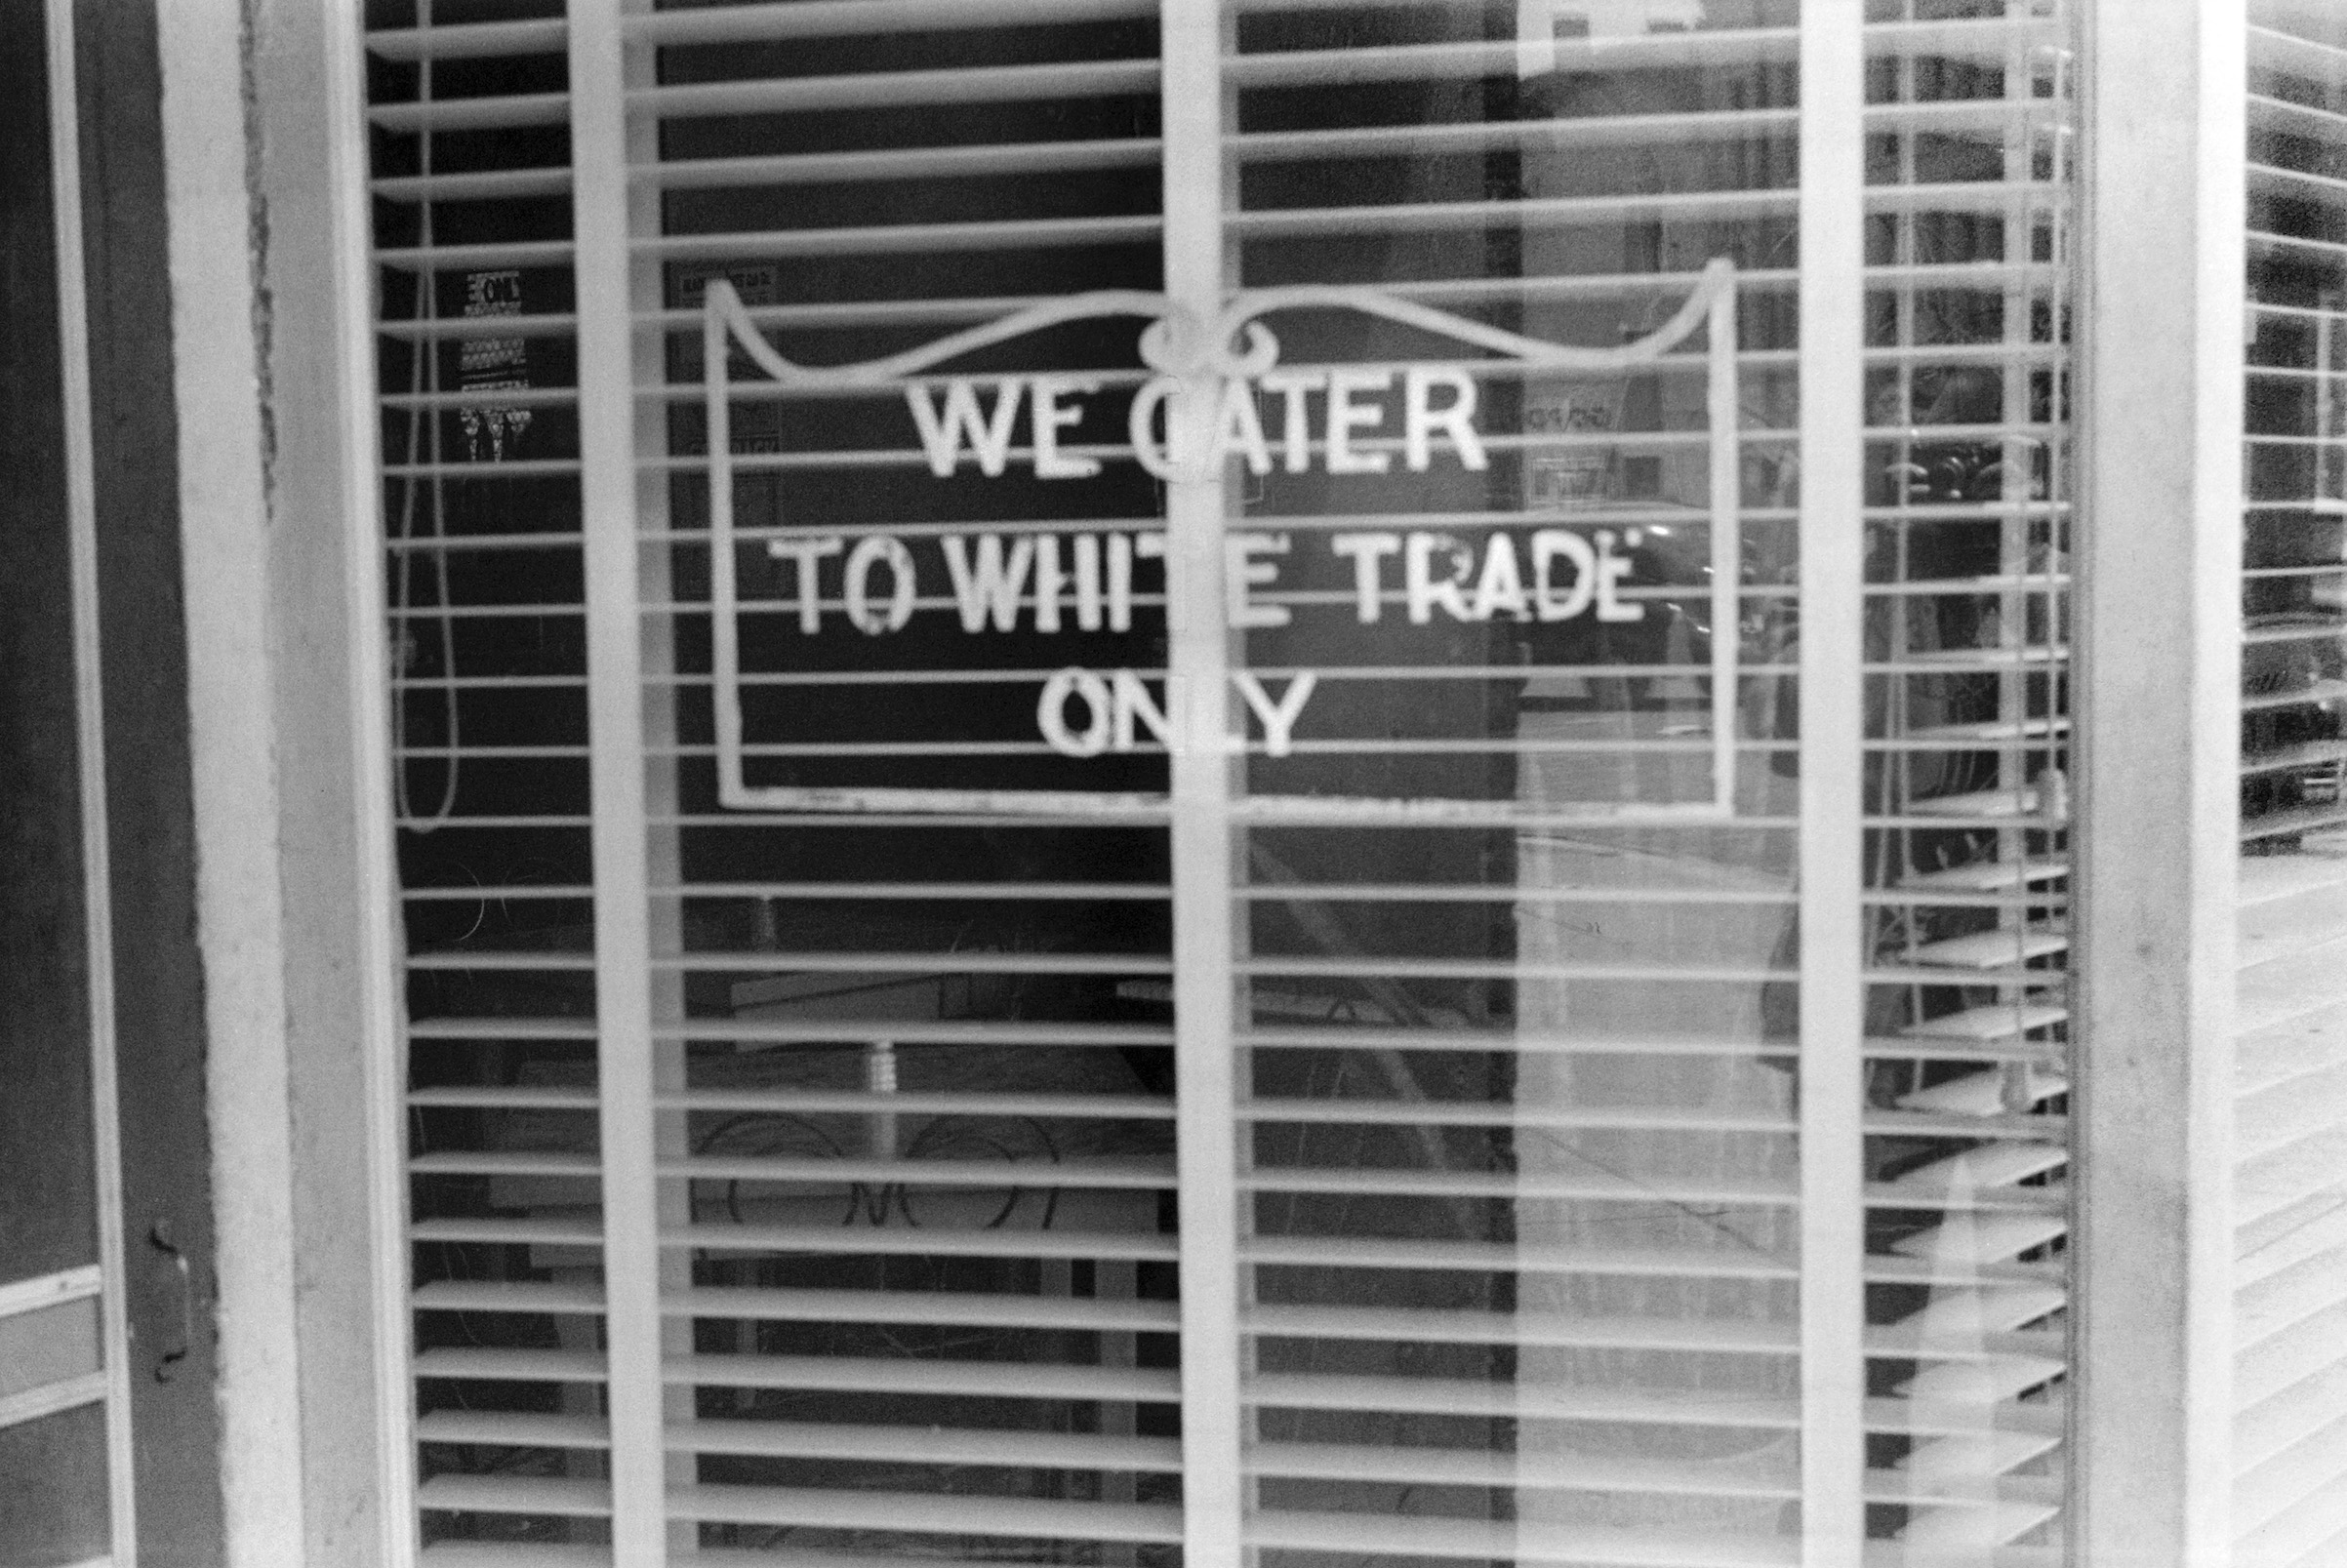 Restaurant with Sign "We Cater to White Trade Only," Lancaster Ohio, USA, Ben Shahn, Farm Security Administration, August 1938 (Universal Images Group via Getty)